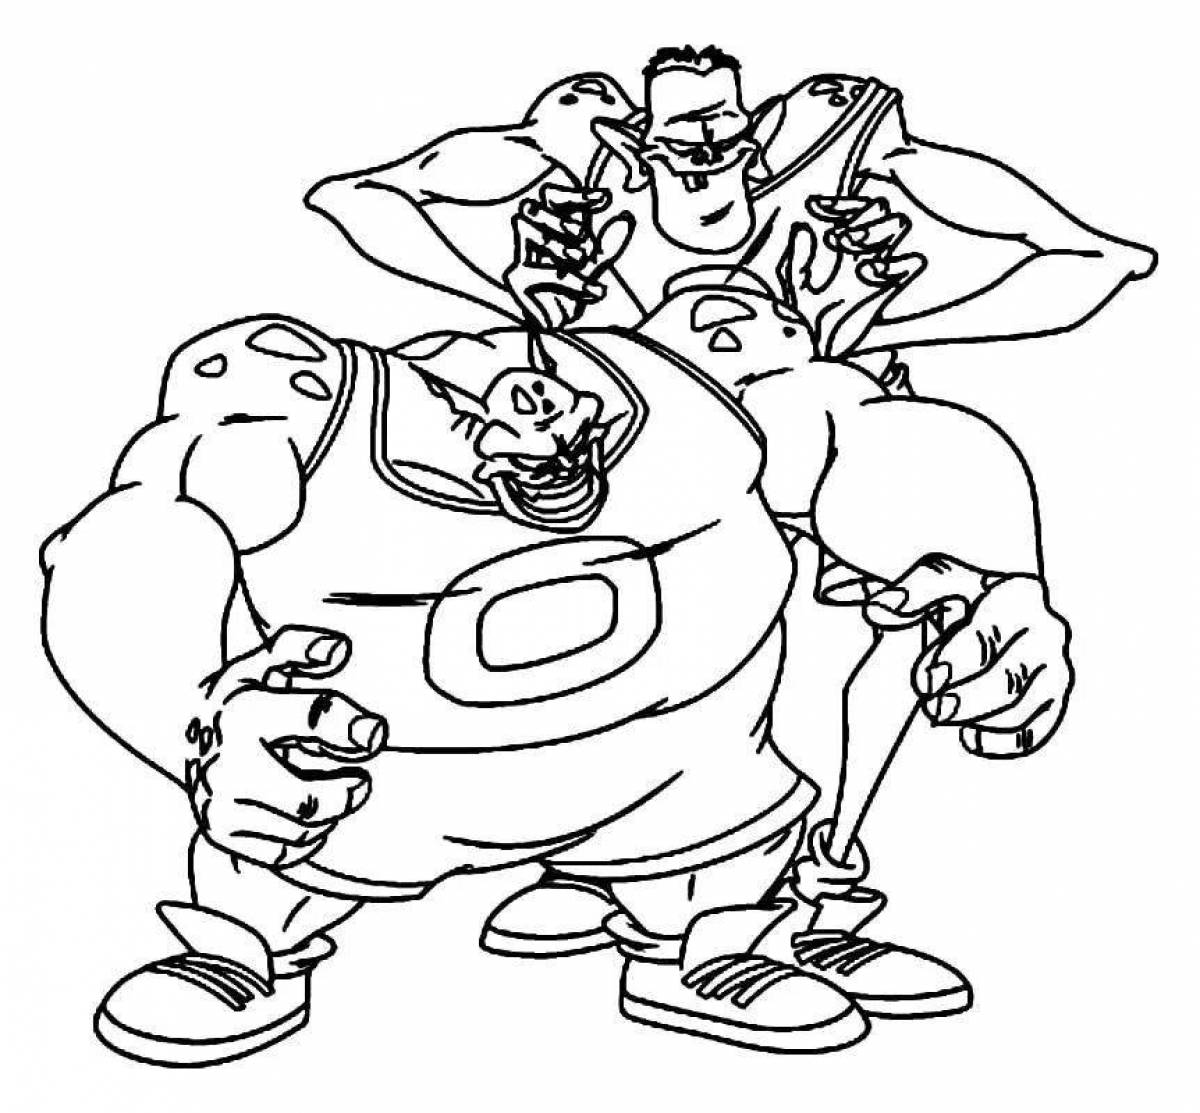 Gorgeous Space Jam coloring page